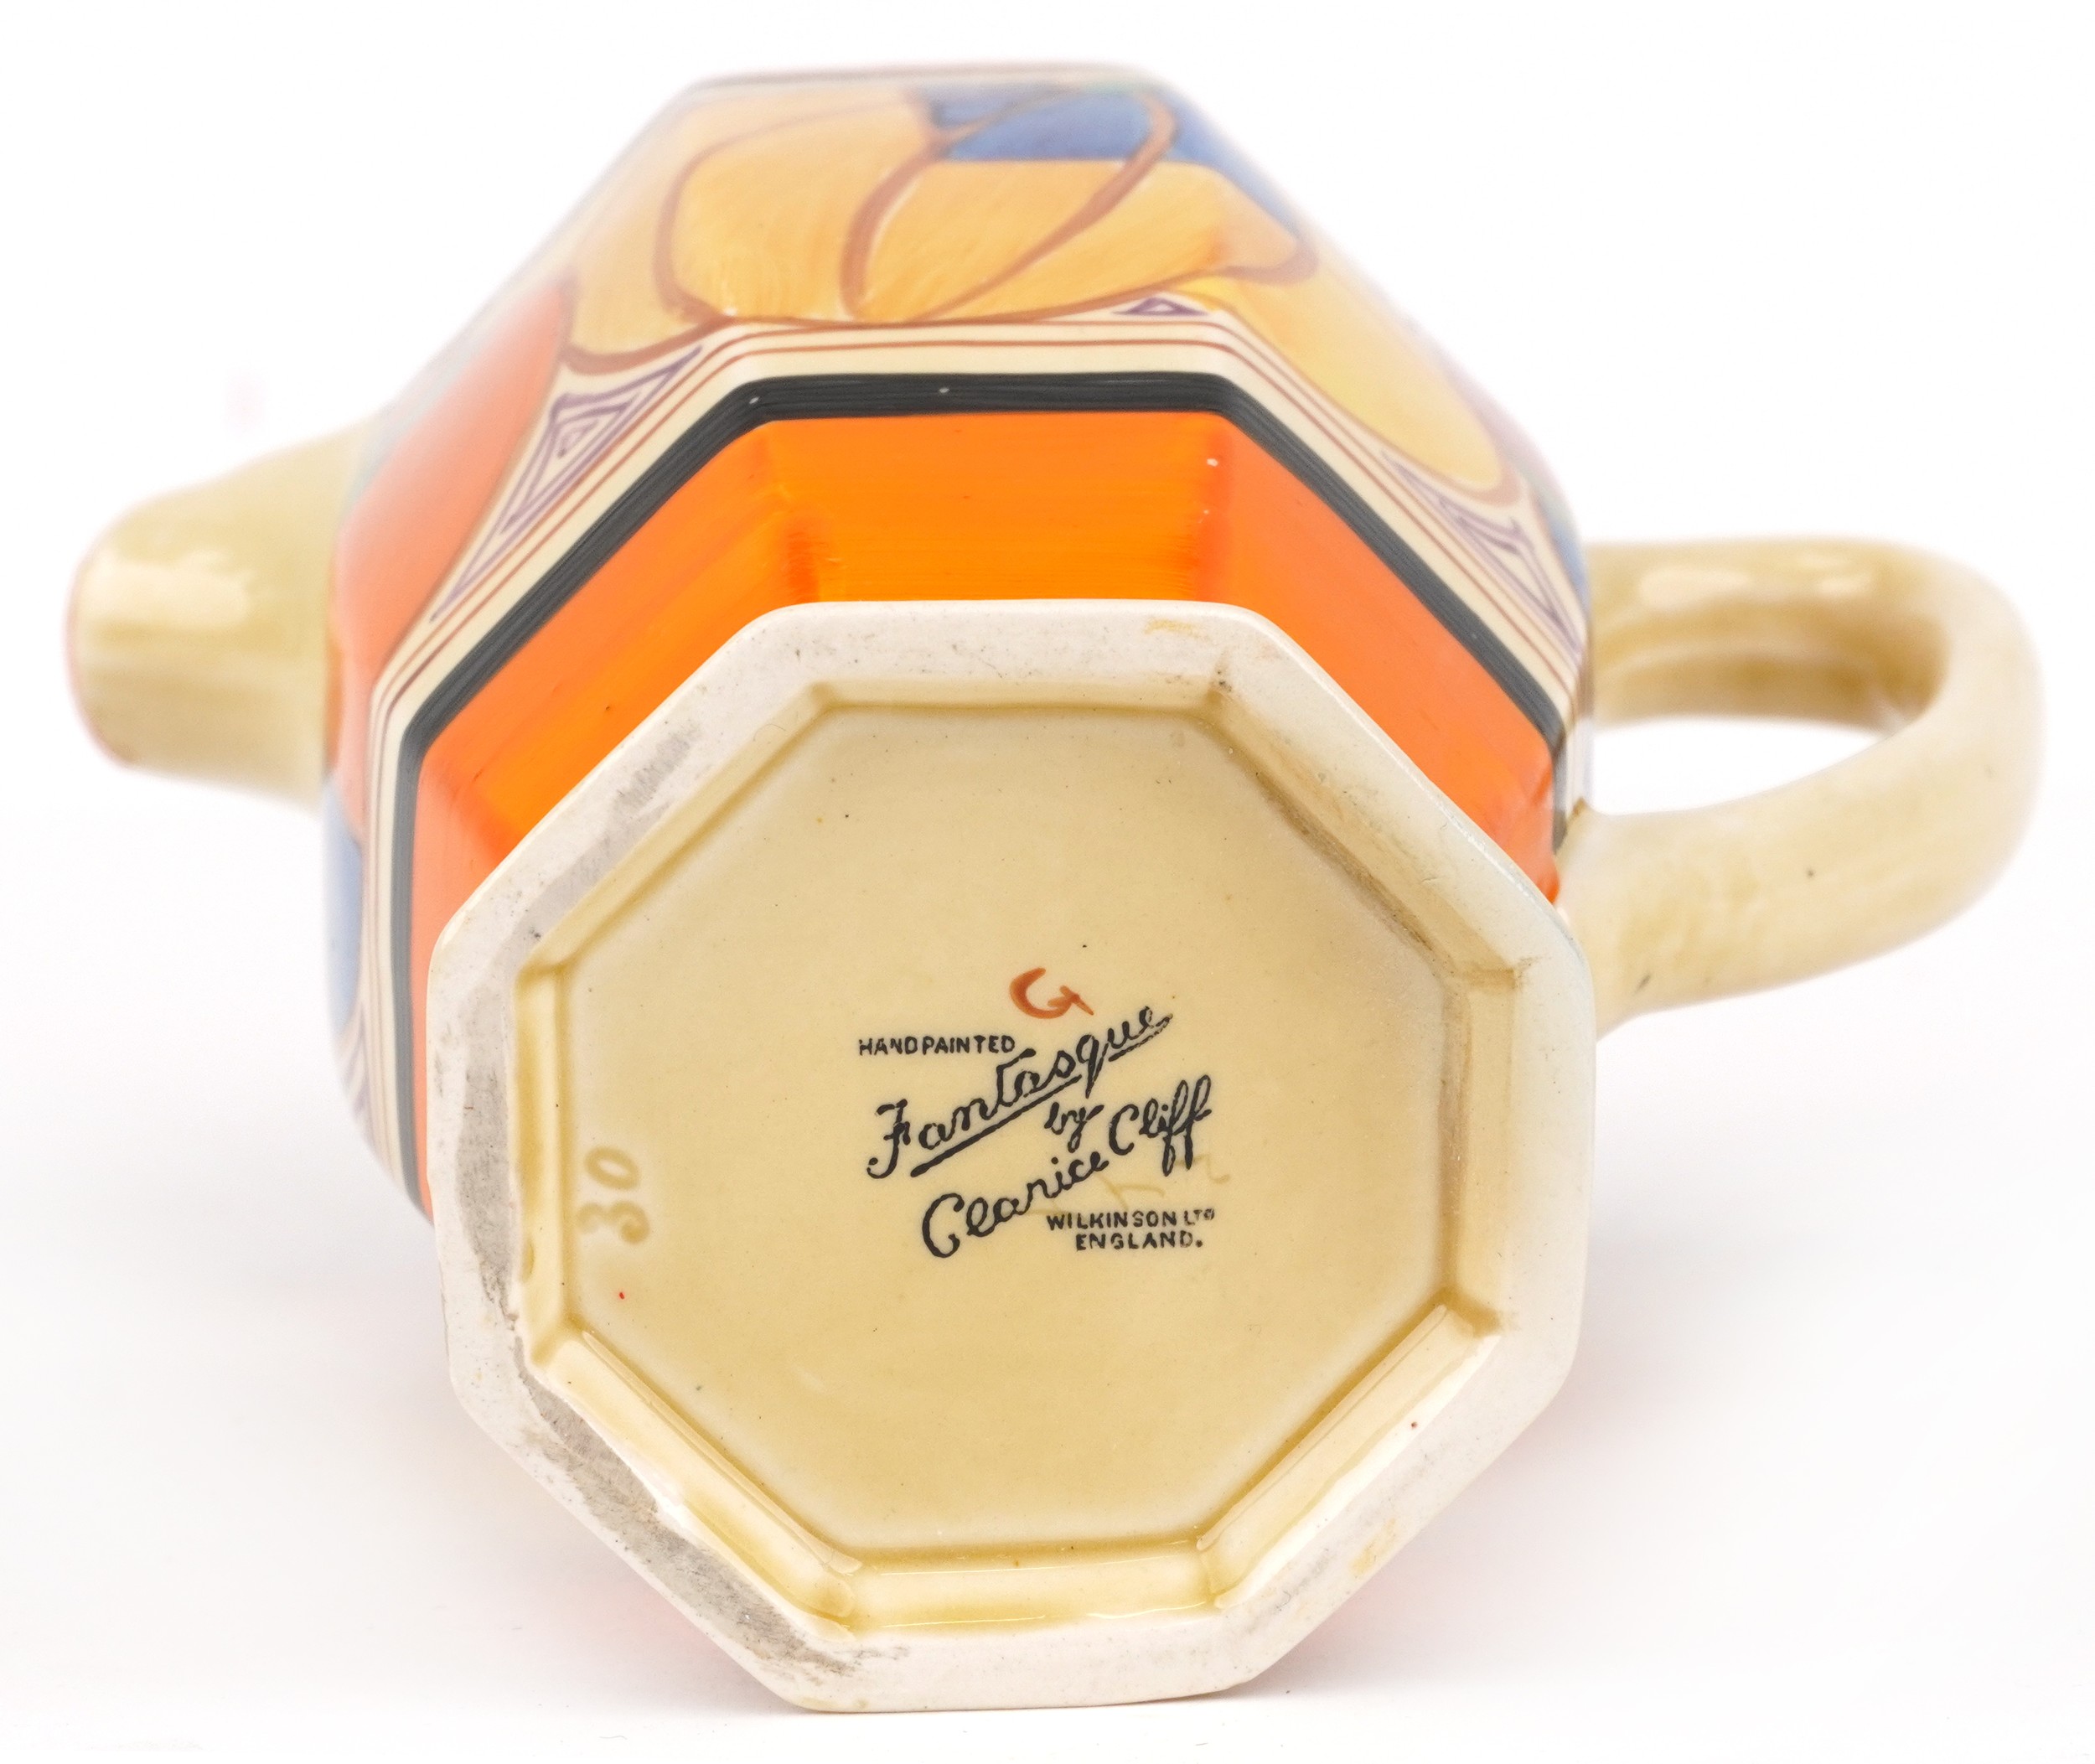 Clarice Cliff, Art Deco Fantastique Bizarre water jug with octagonal body hand painted in the - Image 7 of 8